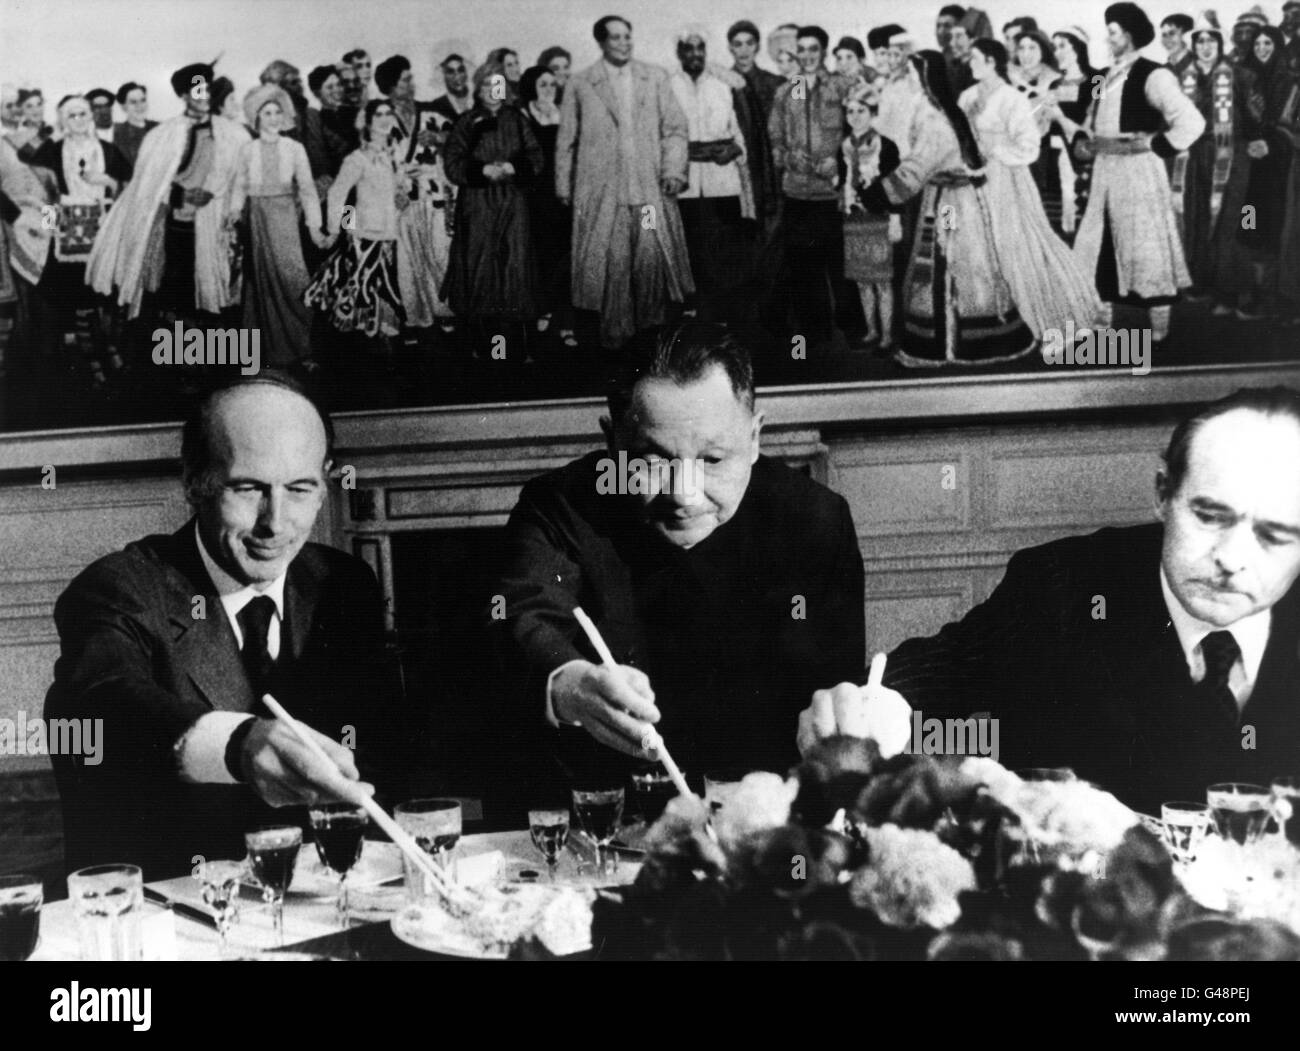 PARIS : 15/5/75 : (LR) FRENCH PRESIDENT VALERY GISCARD D'ESTAING, CHINESE VICE PREMIERE DENG XIAOPENG AND FRENCH FOREIGN MINISTER JEAN SAUVAGNARGUES. (AFP/PA NEWS PHOTO). Stock Photo